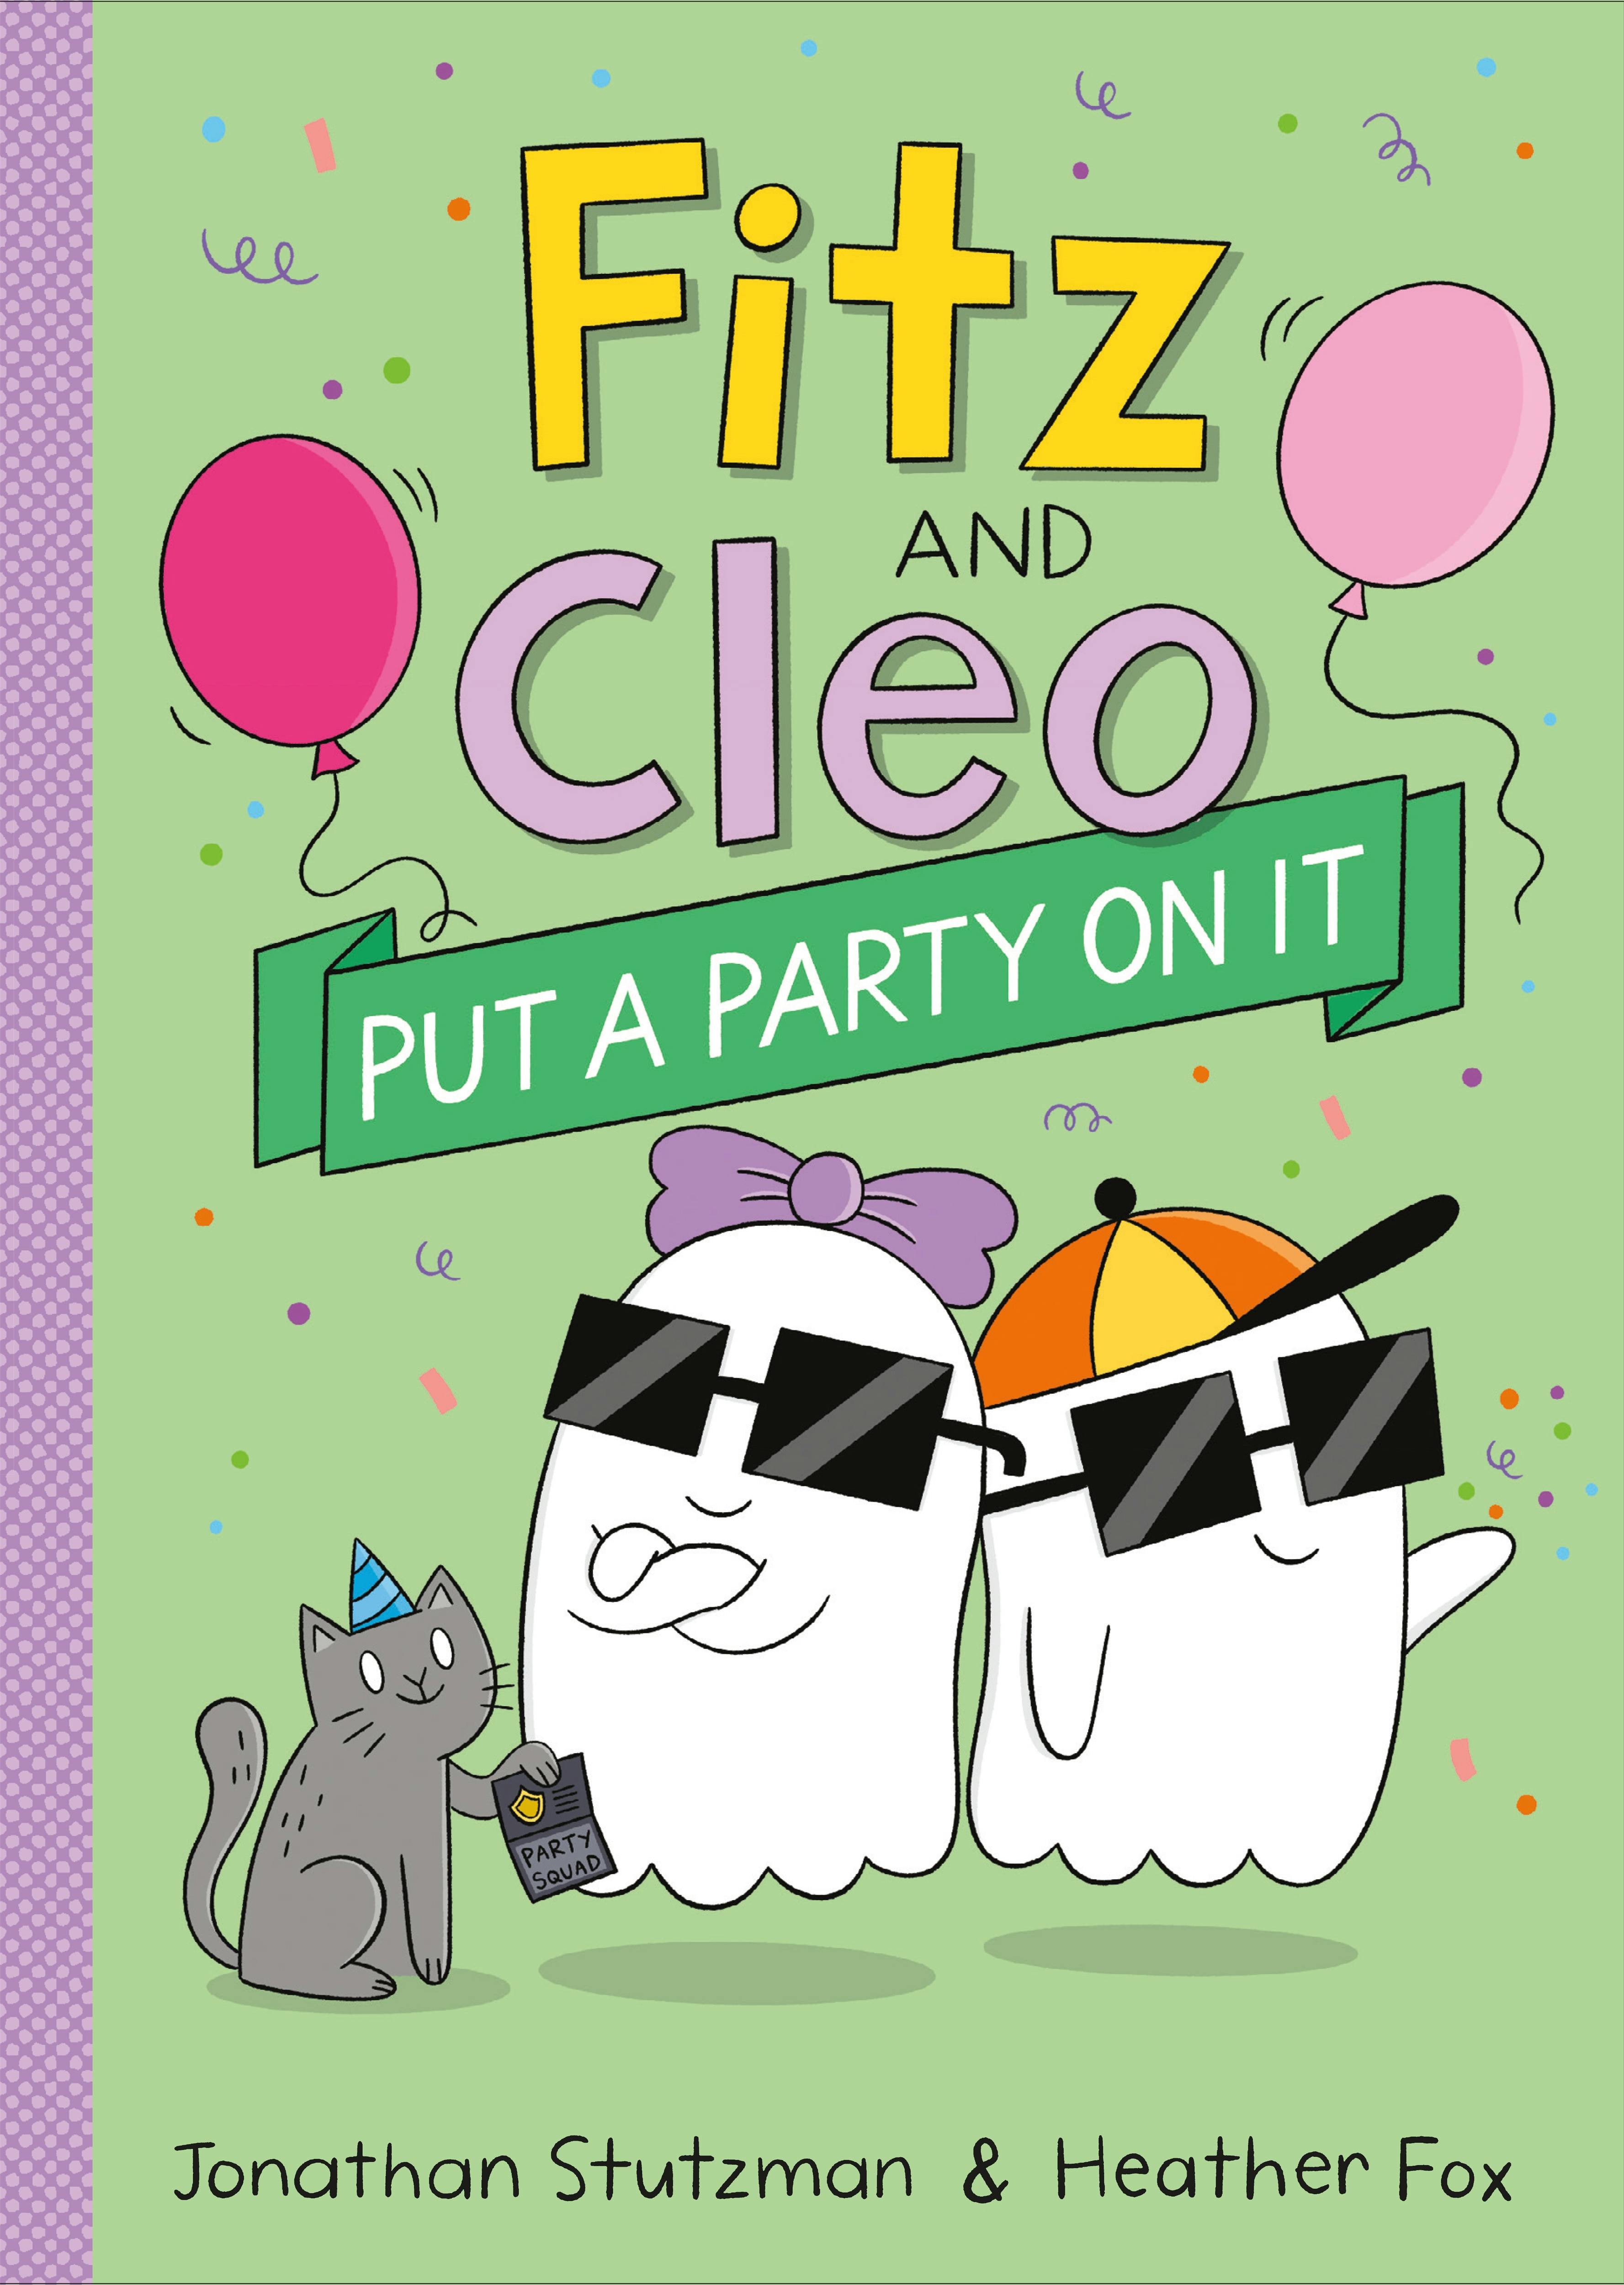 Fitz and Cleo Put a Party on It